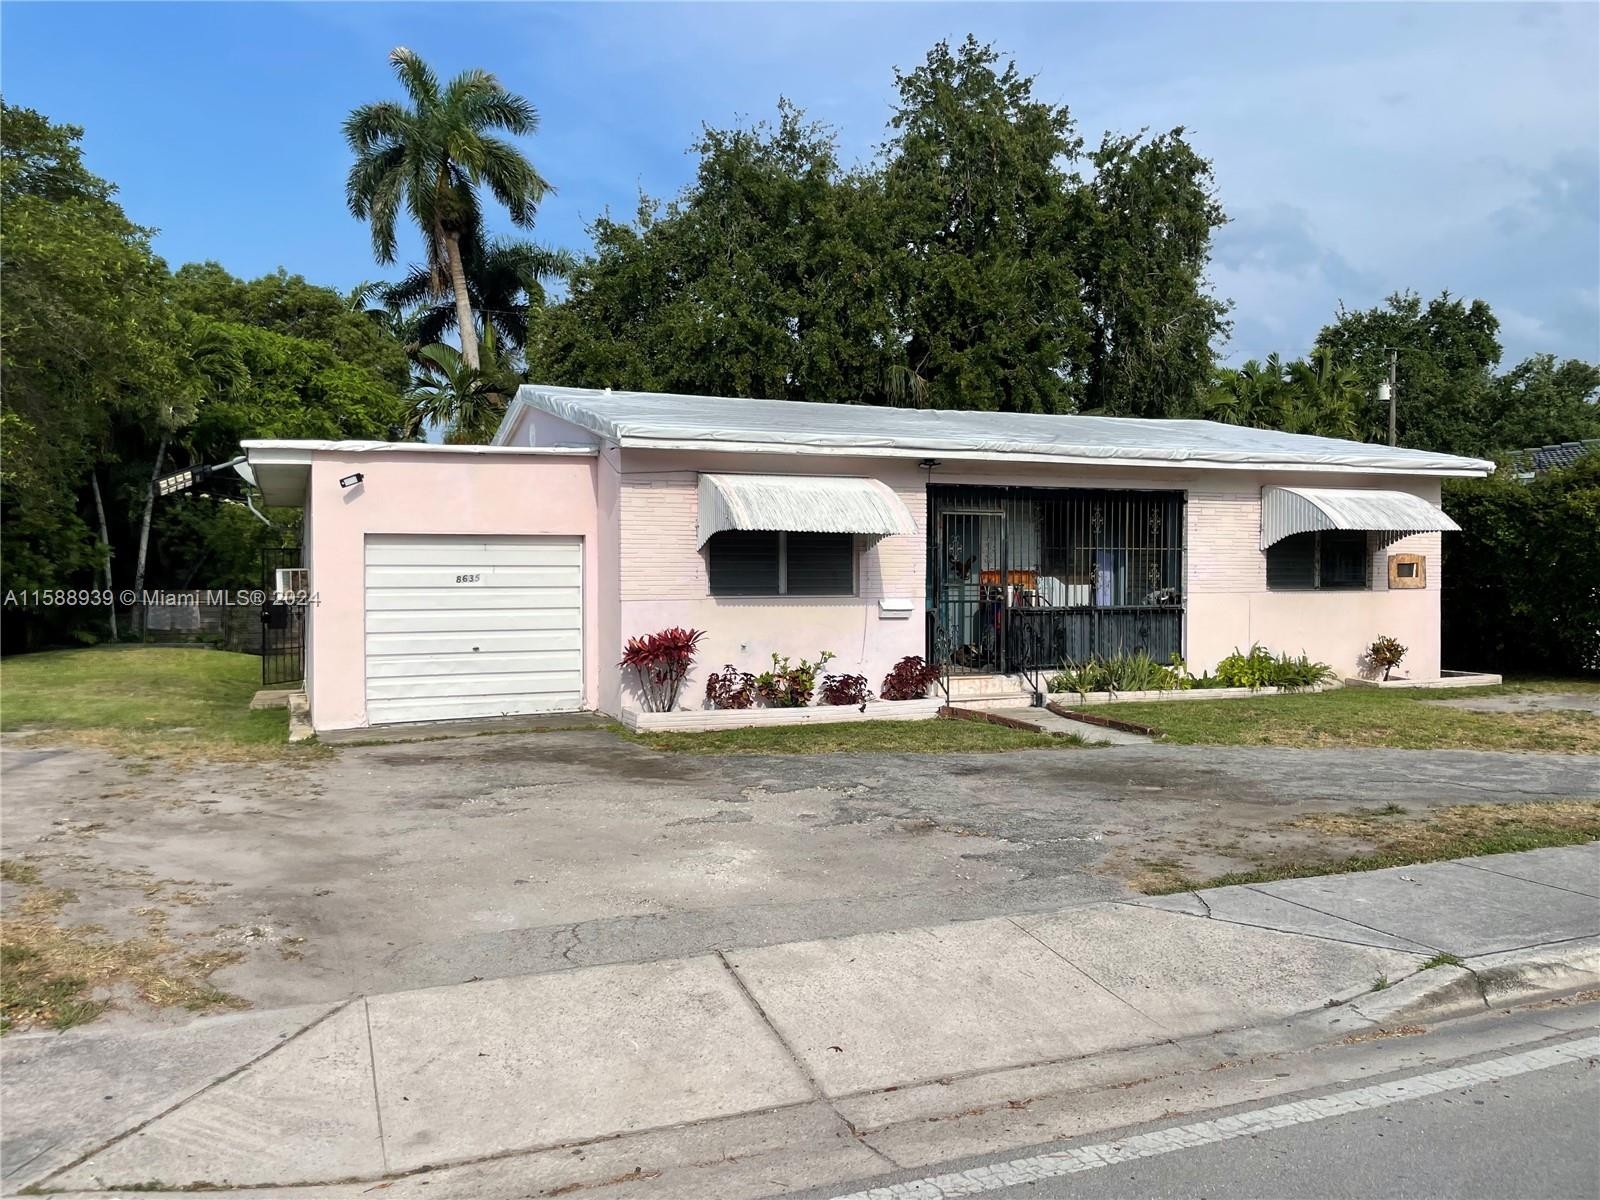 2. 8635 N Miami Ave